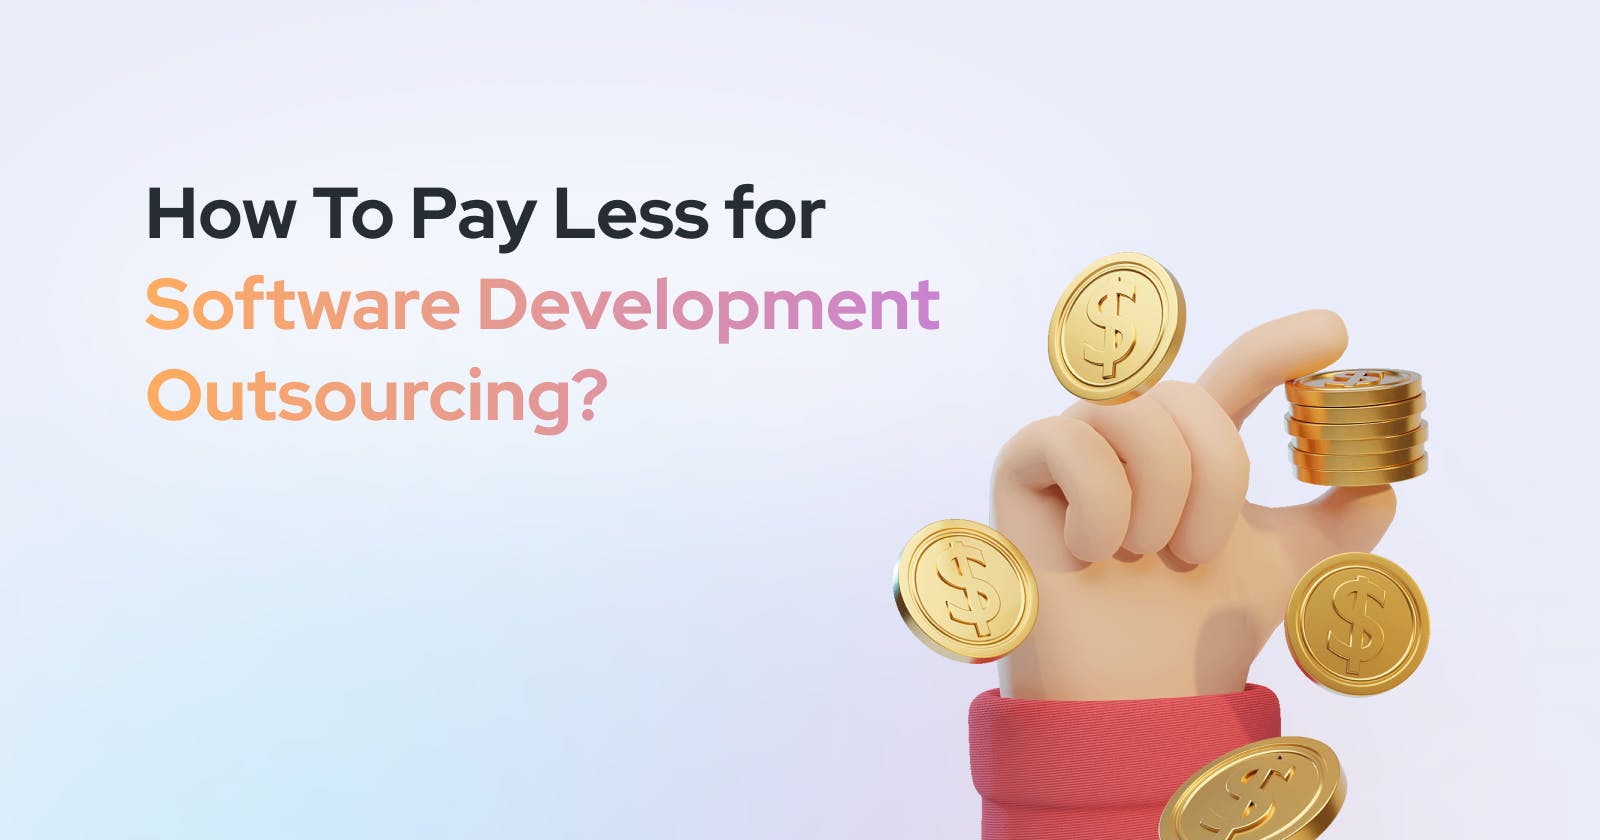 How To Pay Less for Software Development Outsourcing?